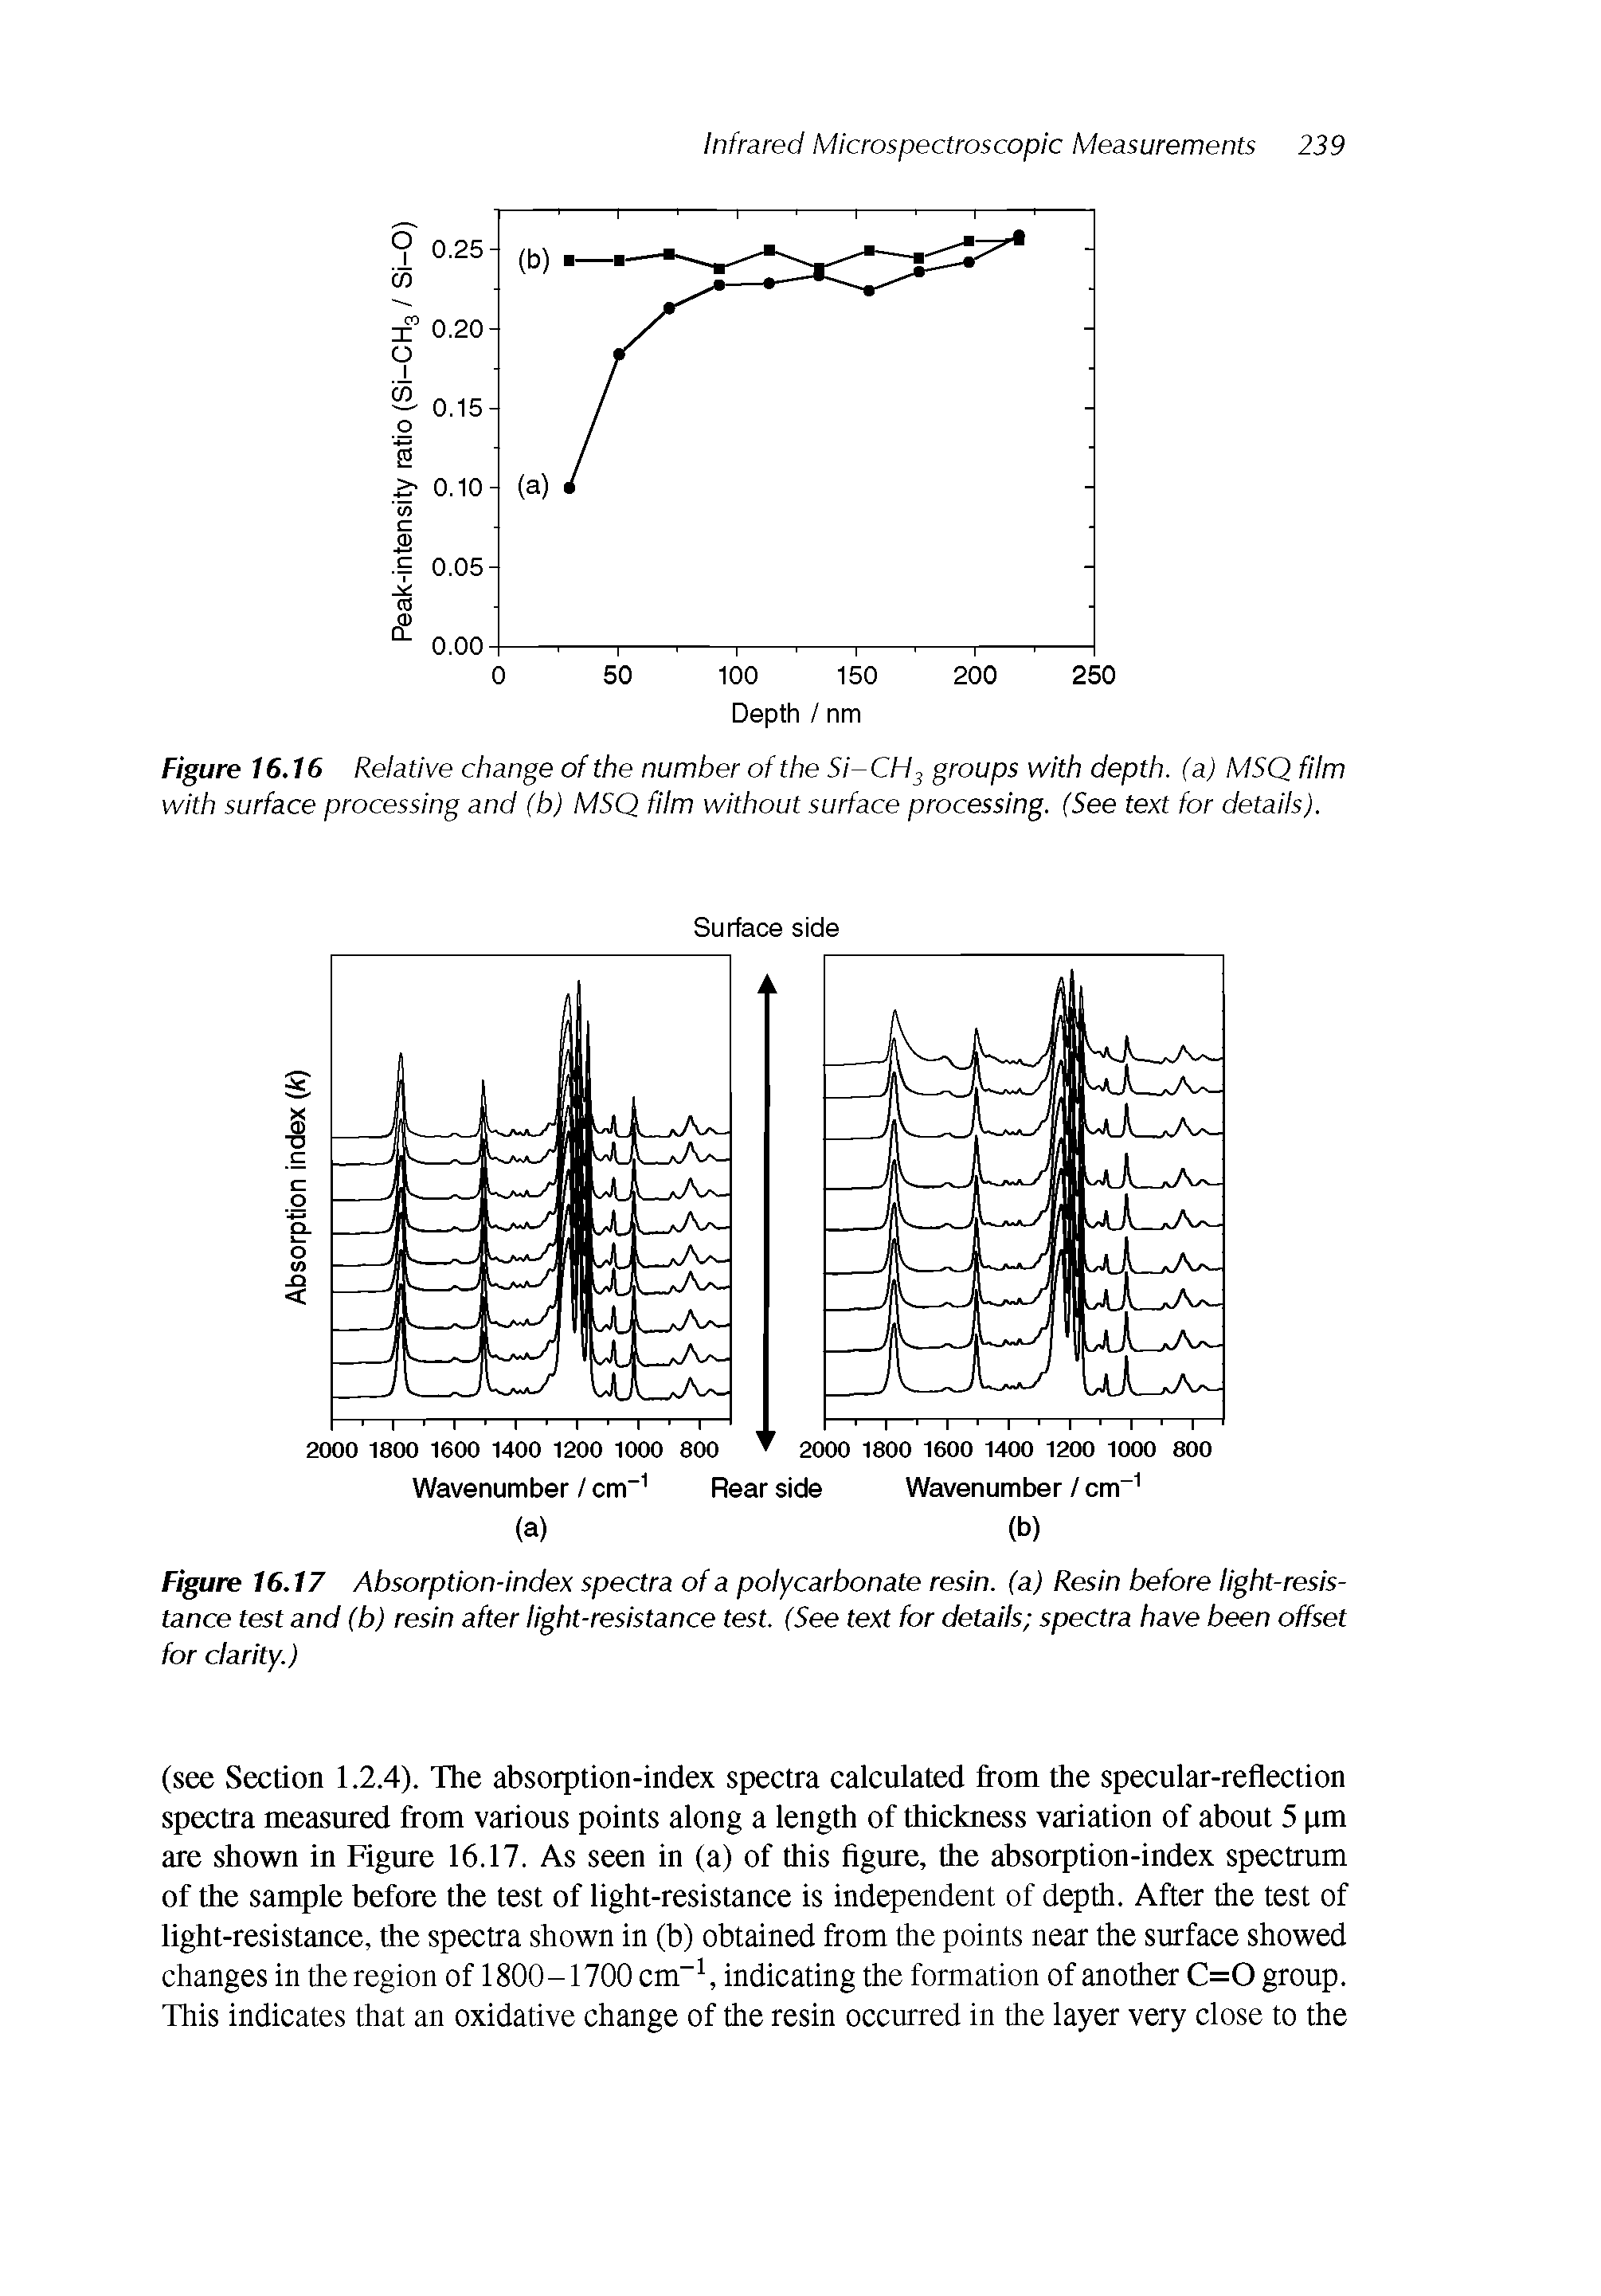 Figure 16.17 Absorption-index spectra of a polycarbonate resin, (a) Resin before light-resistance test and (b) resin after light-resistance test. (See text for details spectra have been offset for clarity.)...